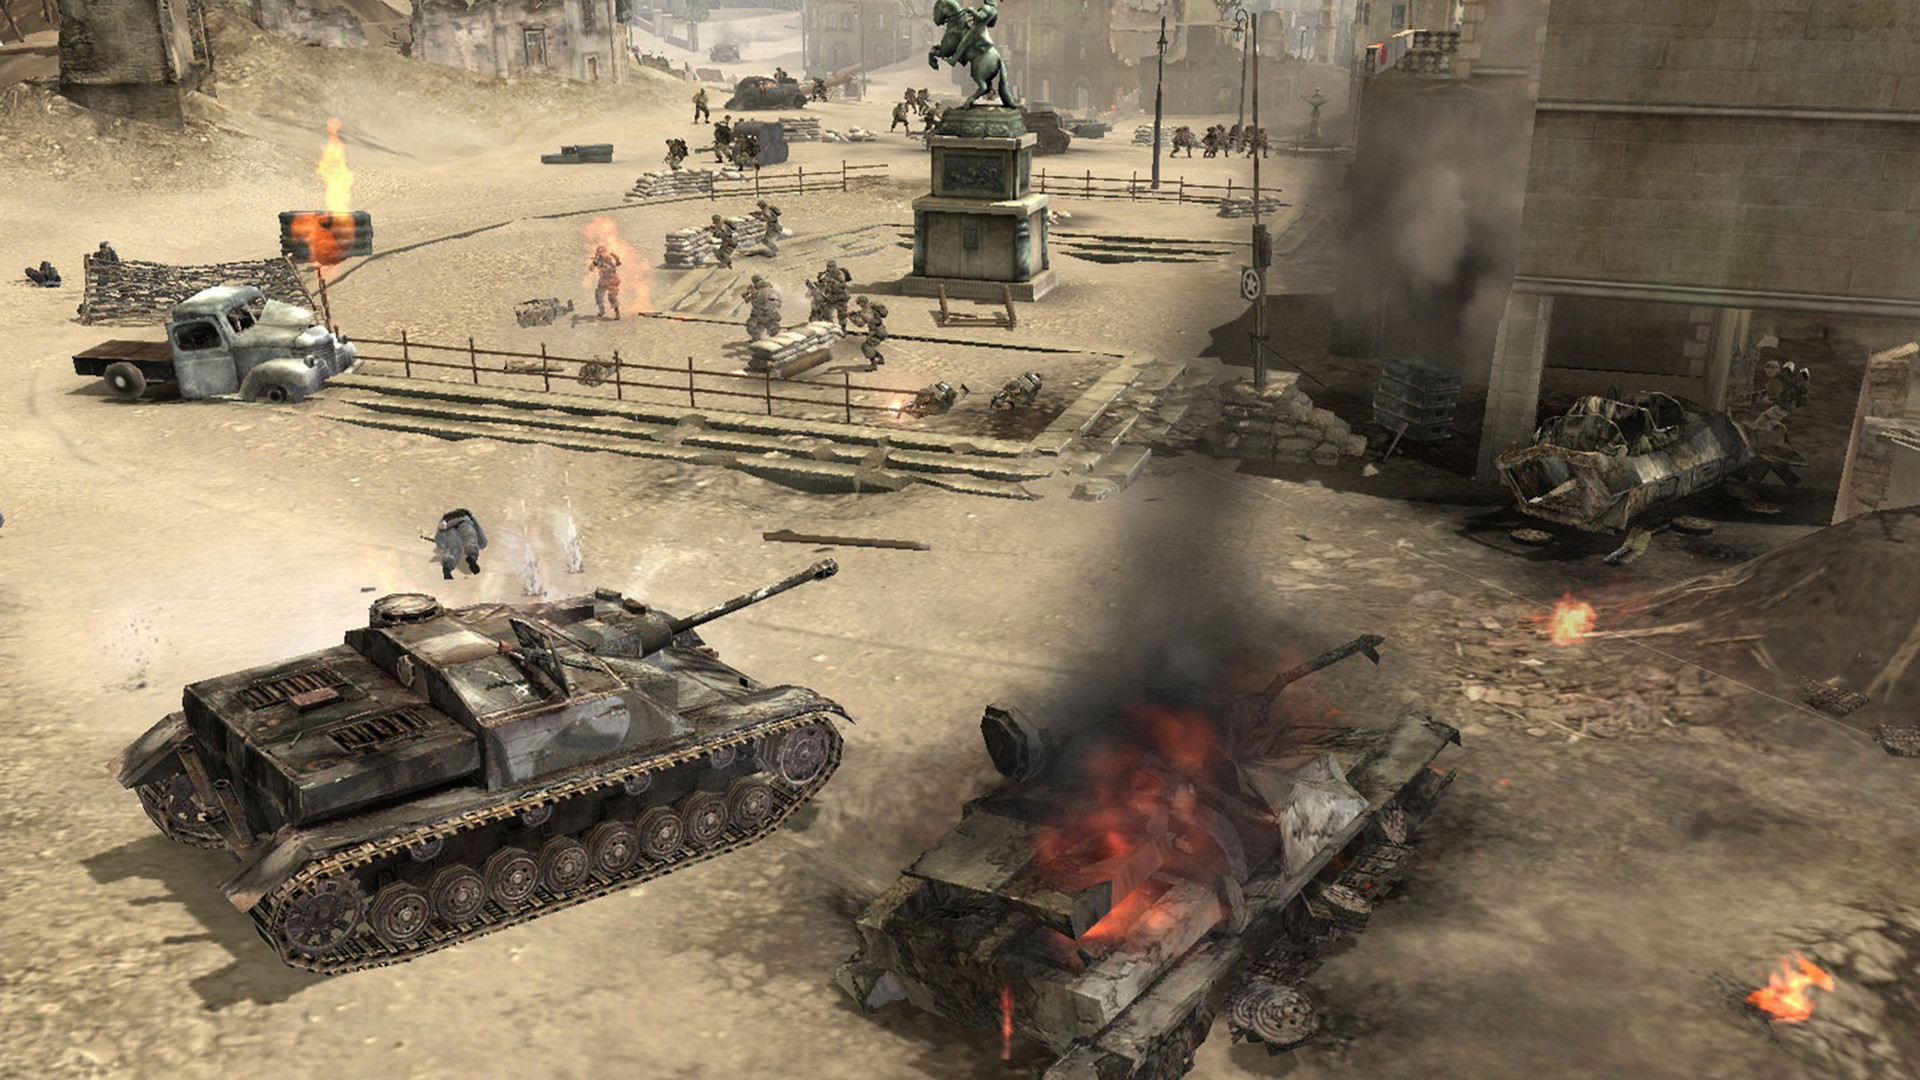 Company of heroes 2 pc game system requirements